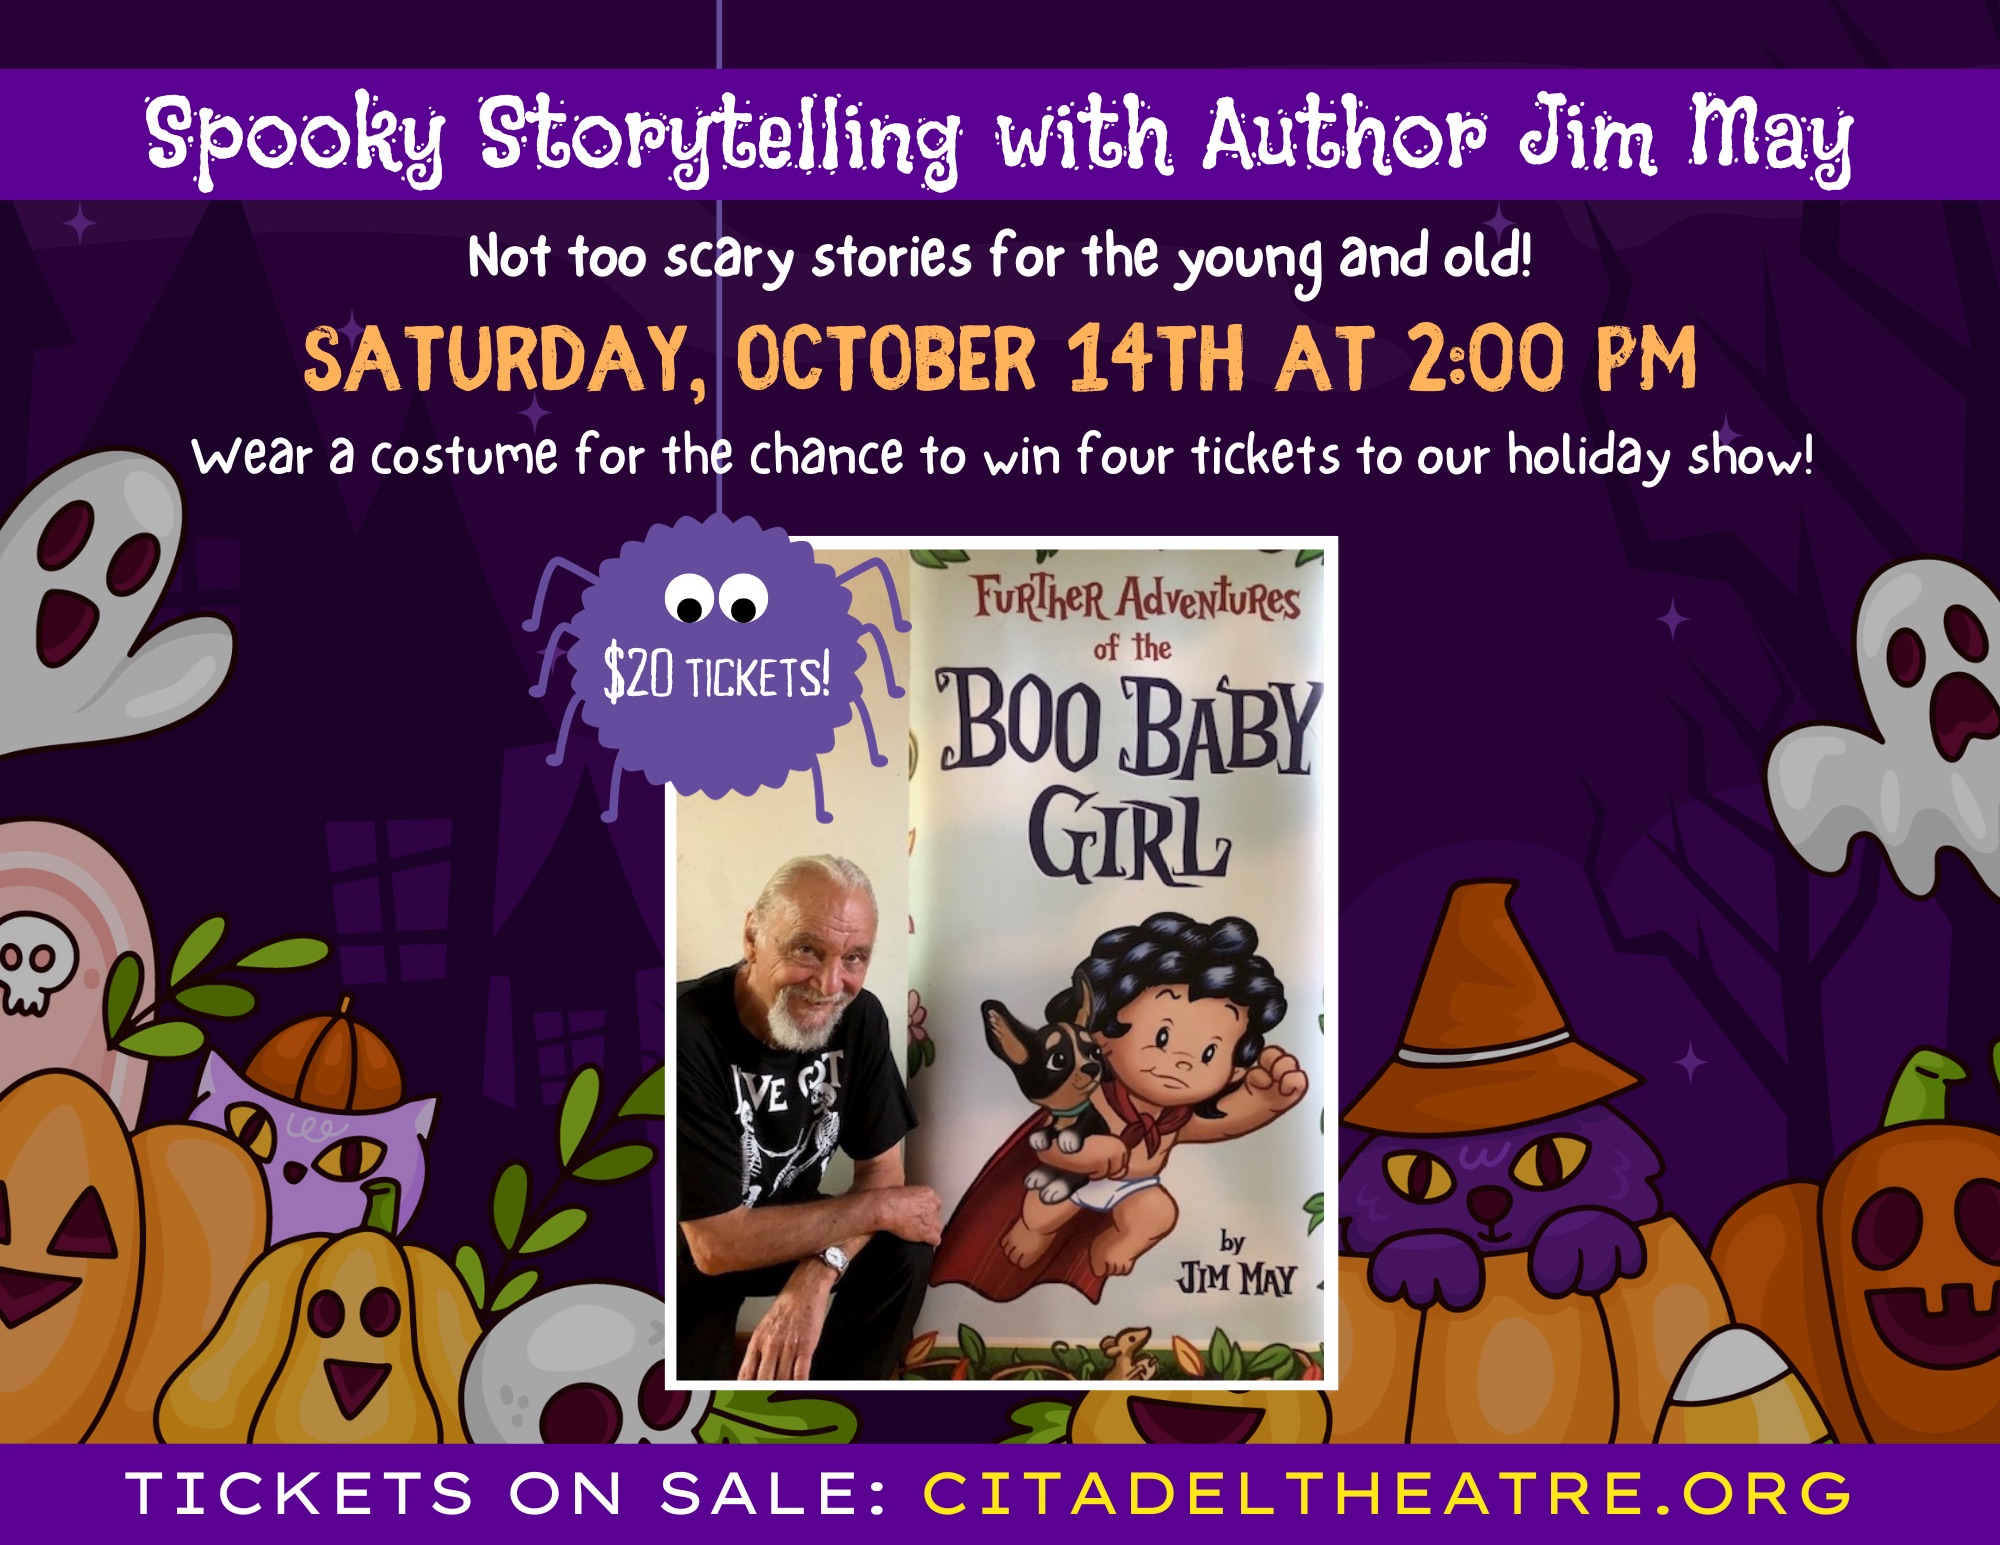 Spooky Storytelling with Author Jim May: Not too scary stories for the young and old!